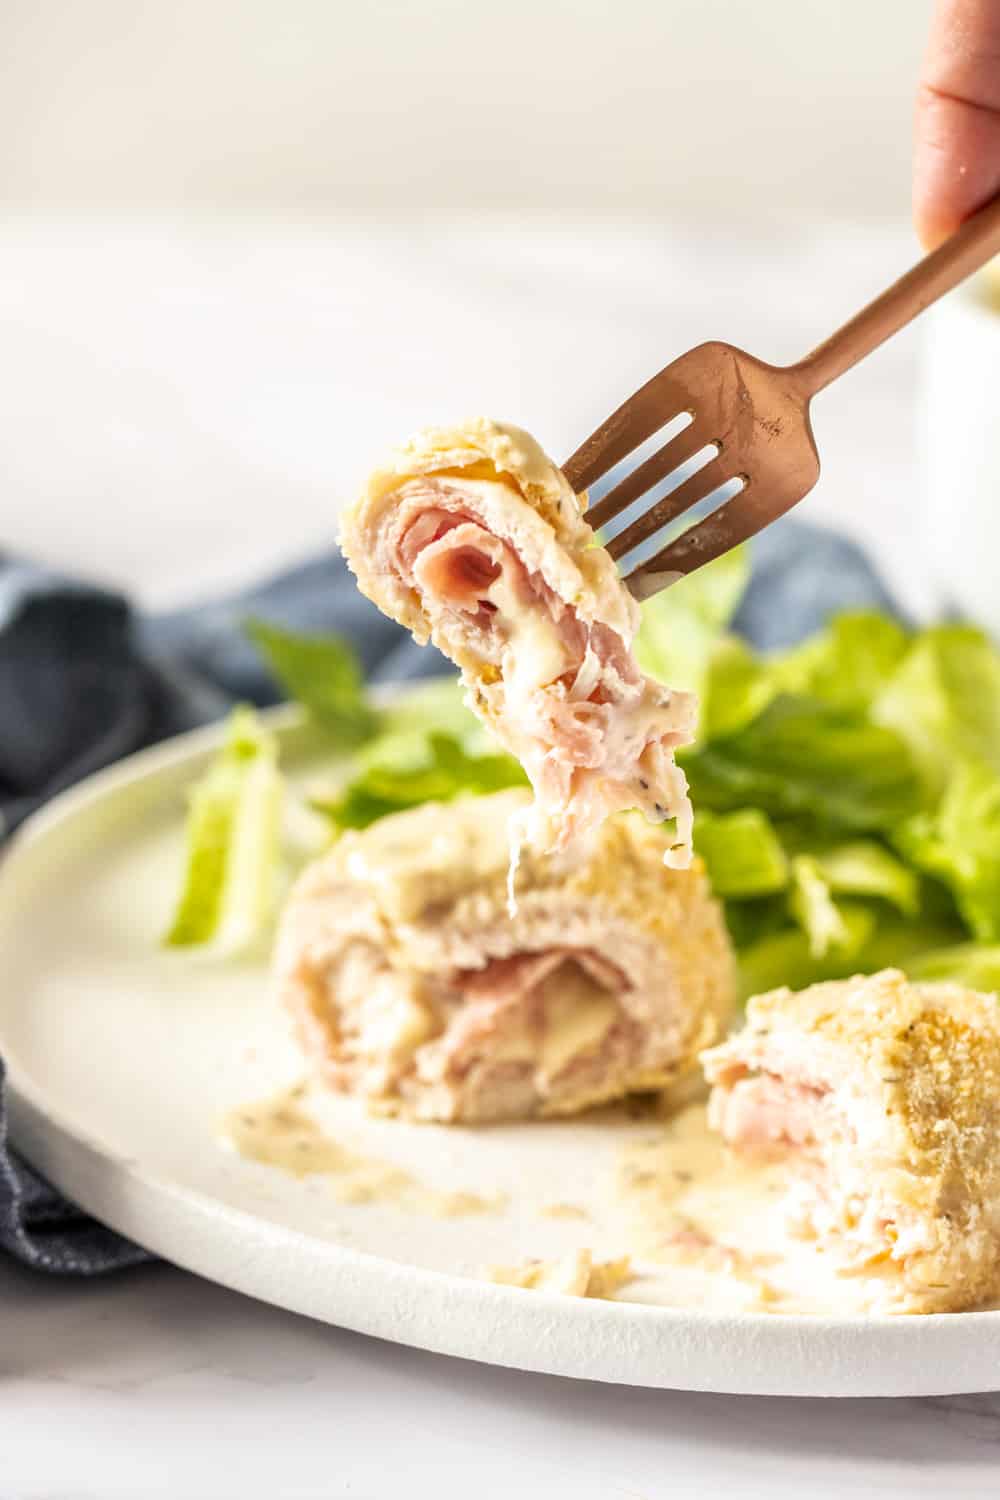 Chicken cordon bleu on a fork showing the inside layers.